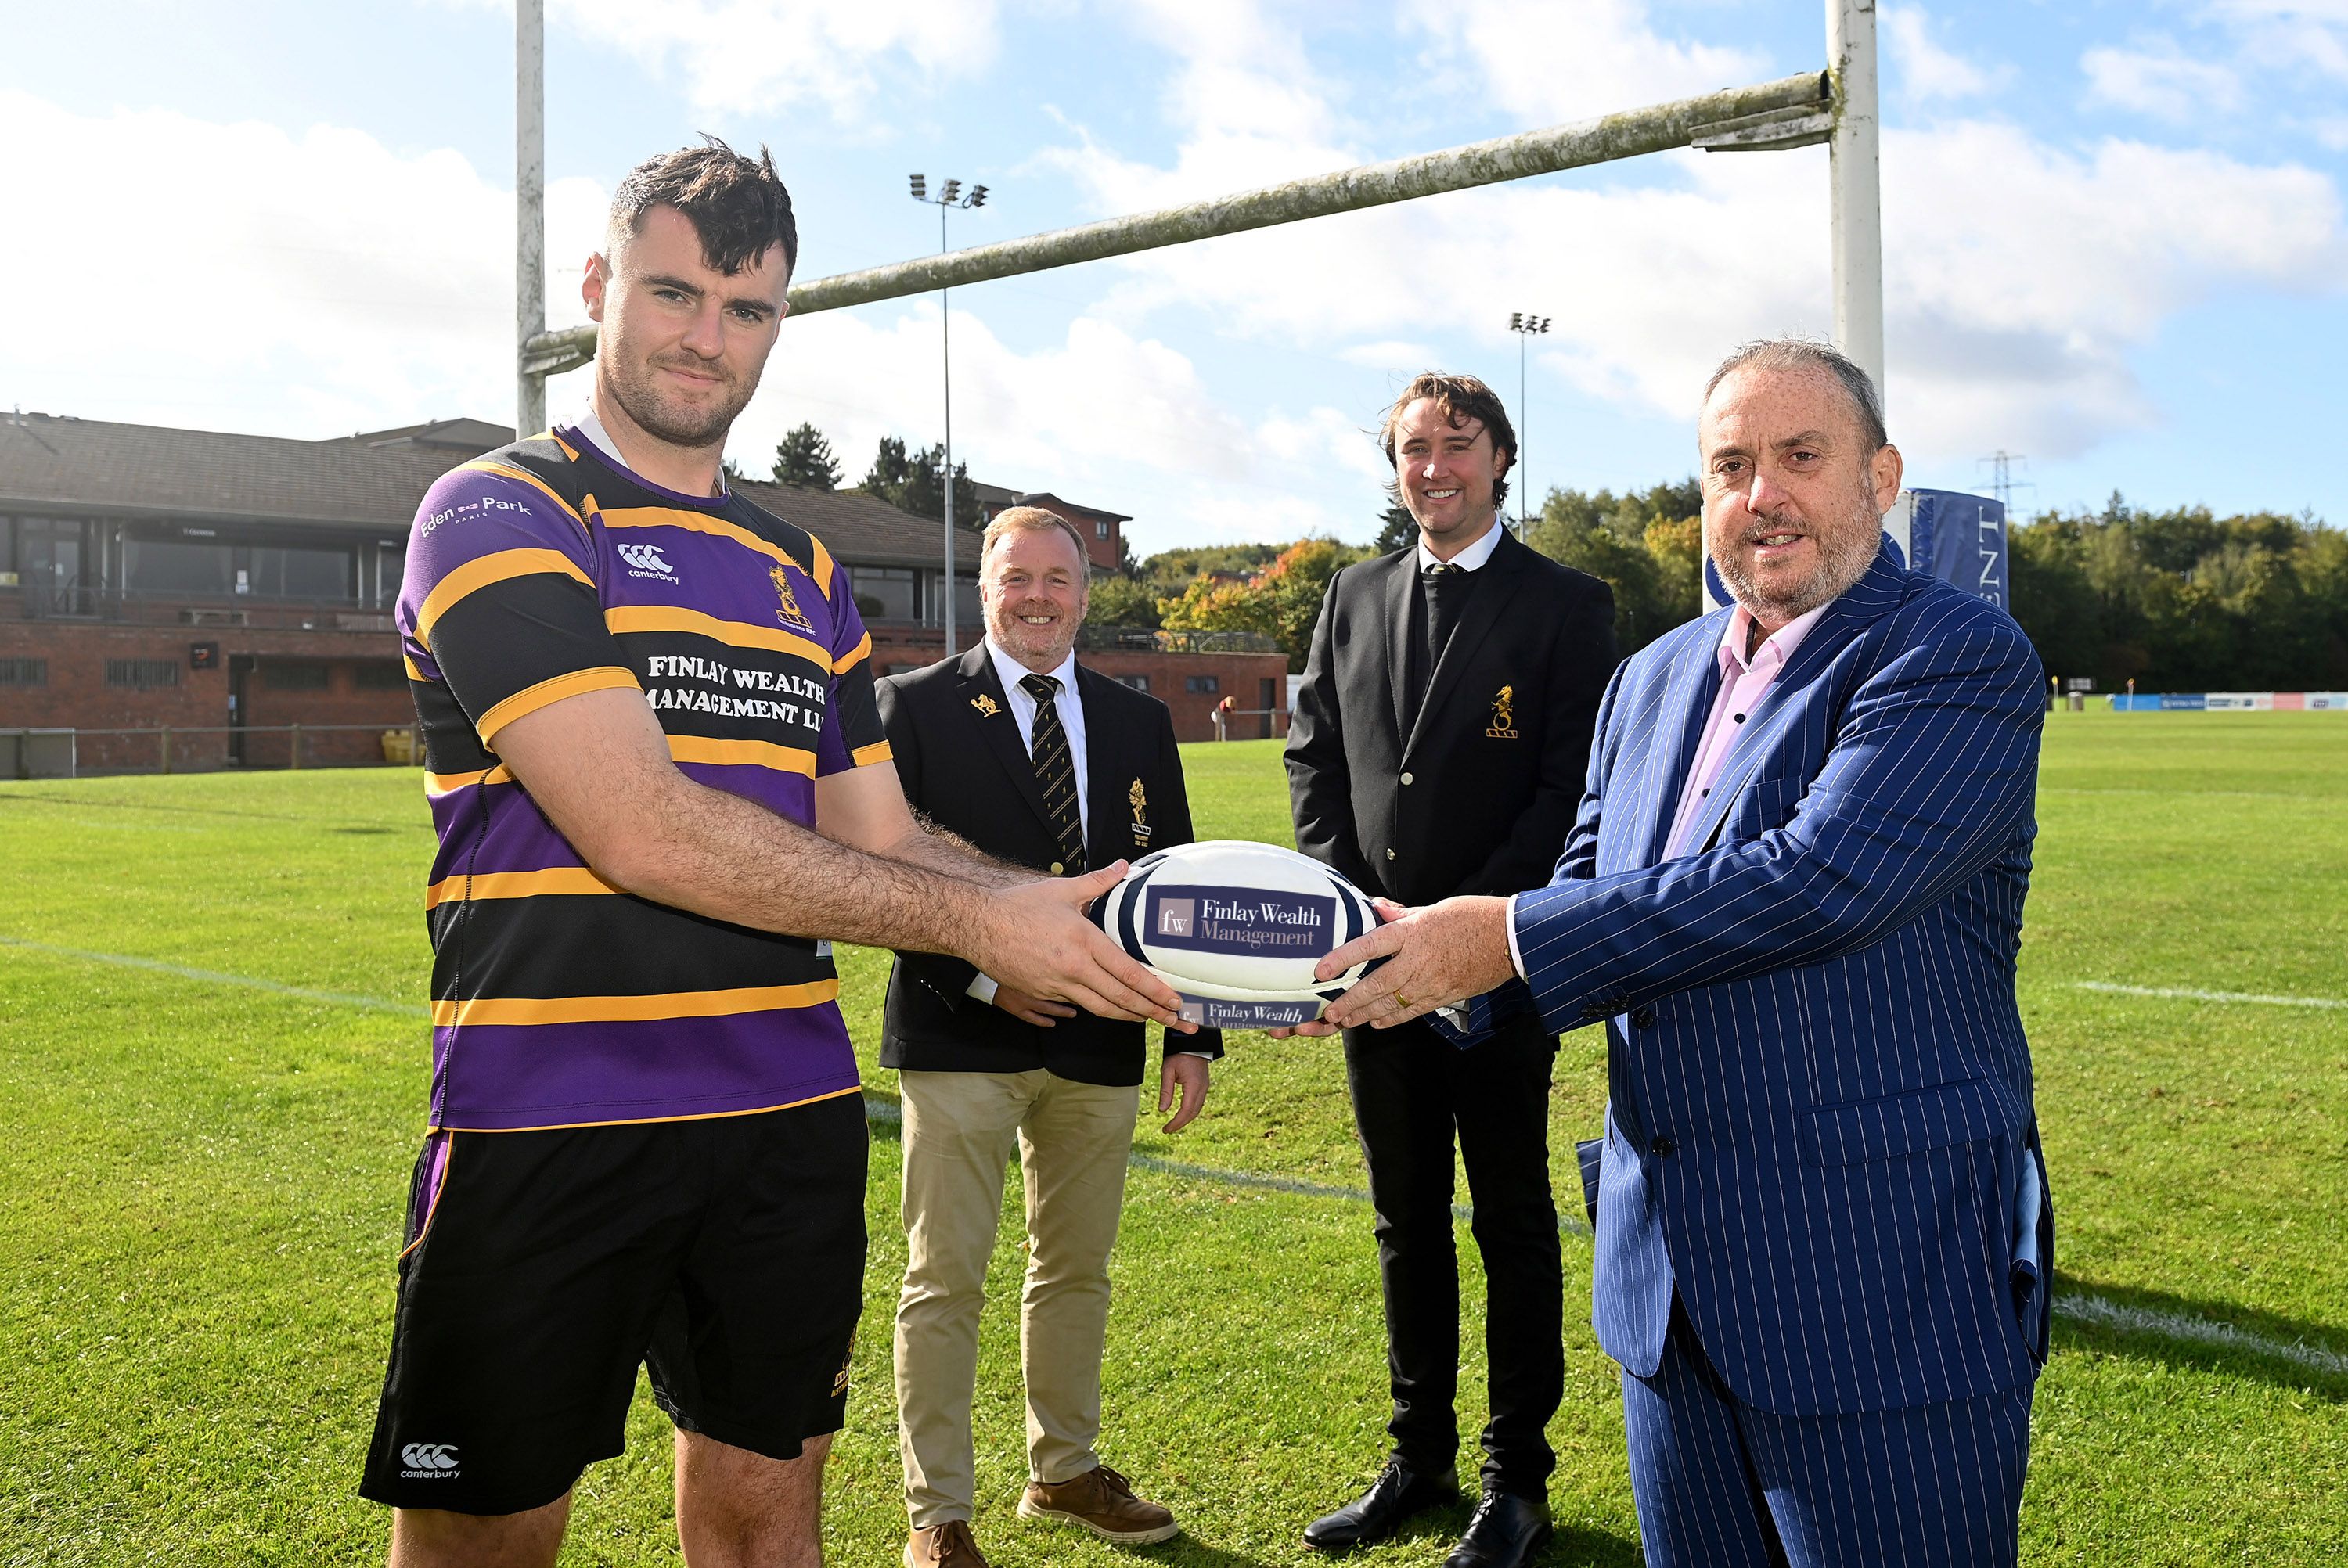 Pictured are (l-r) Eoghan Murphy, Instonians 1ST XV Captain; Owen Lambert, President, Instonians; Peter Bradley, Chairman, Instonians; and Jonathan Finlay, Managing Director, Finlay Wealth Management.